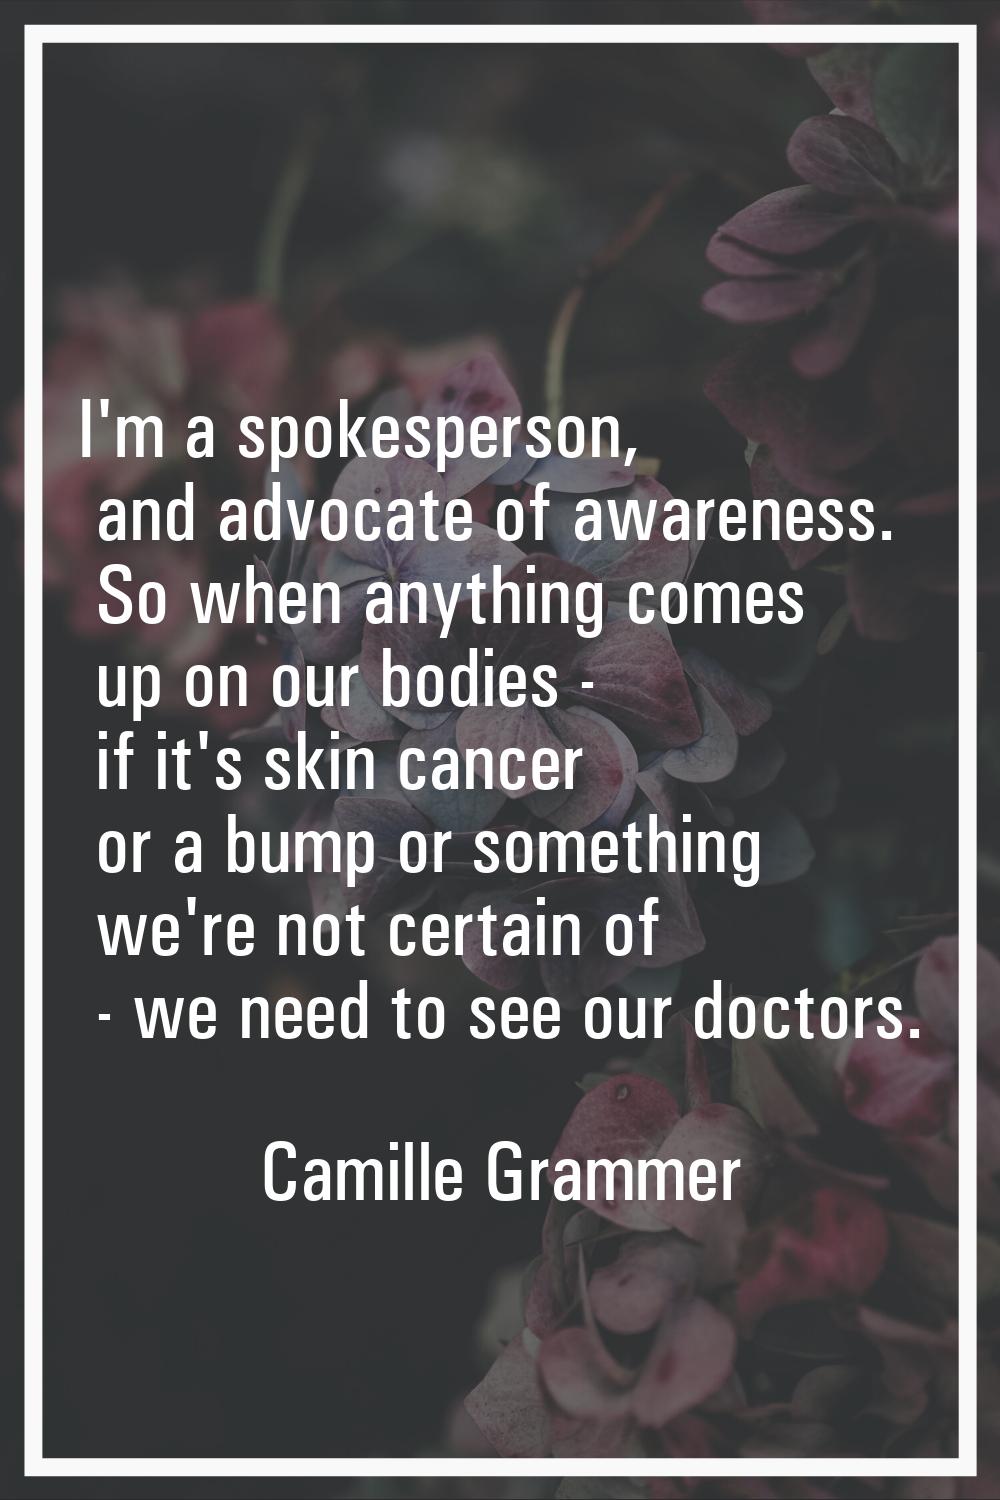 I'm a spokesperson, and advocate of awareness. So when anything comes up on our bodies - if it's sk